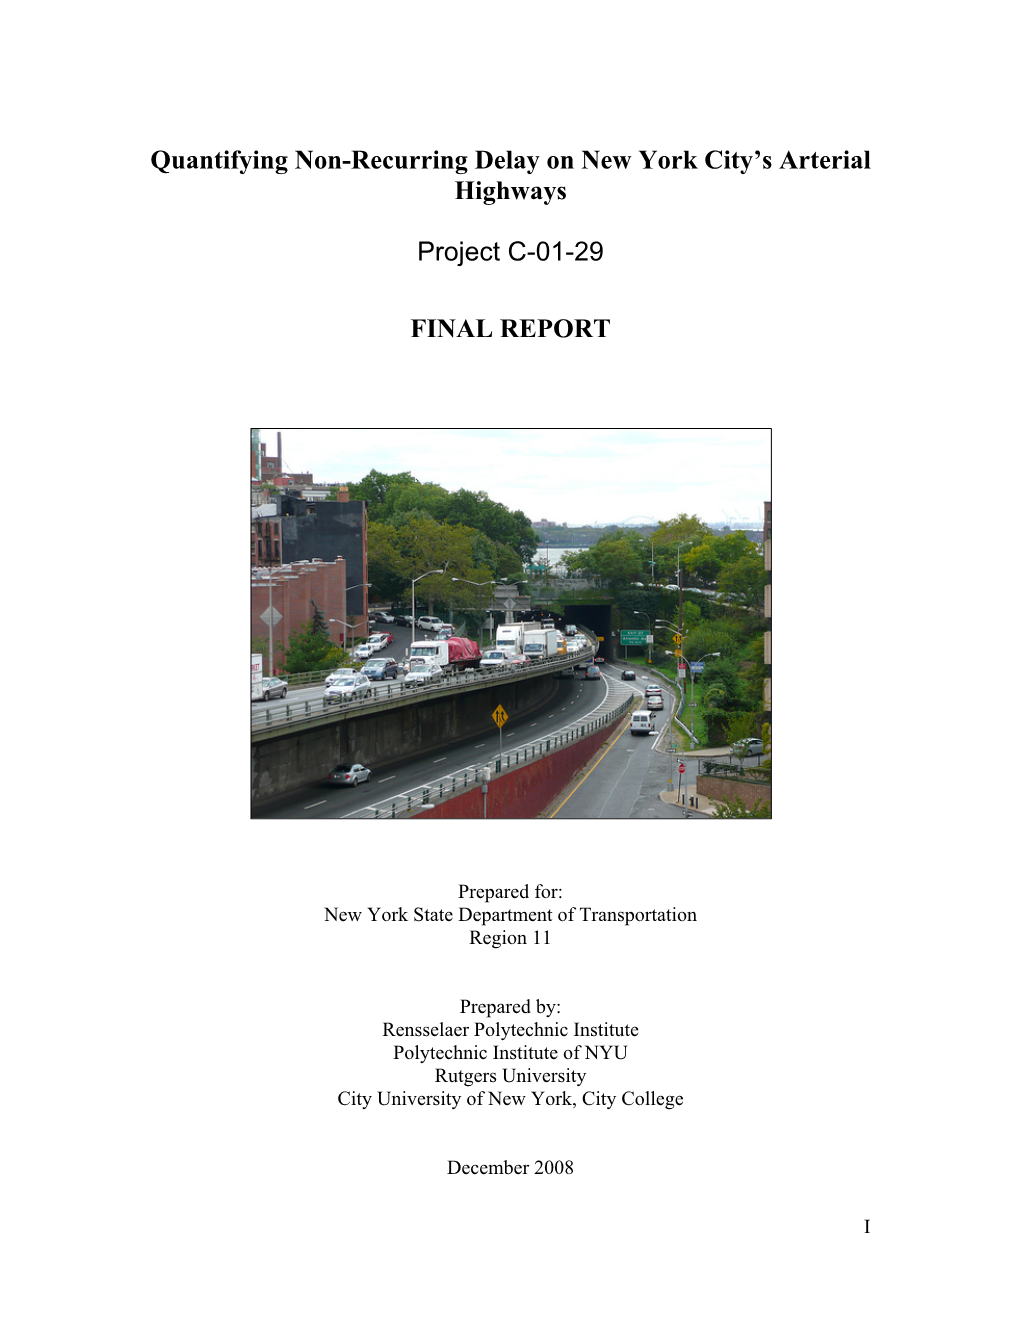 Quantifying Non-Recurring Delay on New York City's Arterial Highways